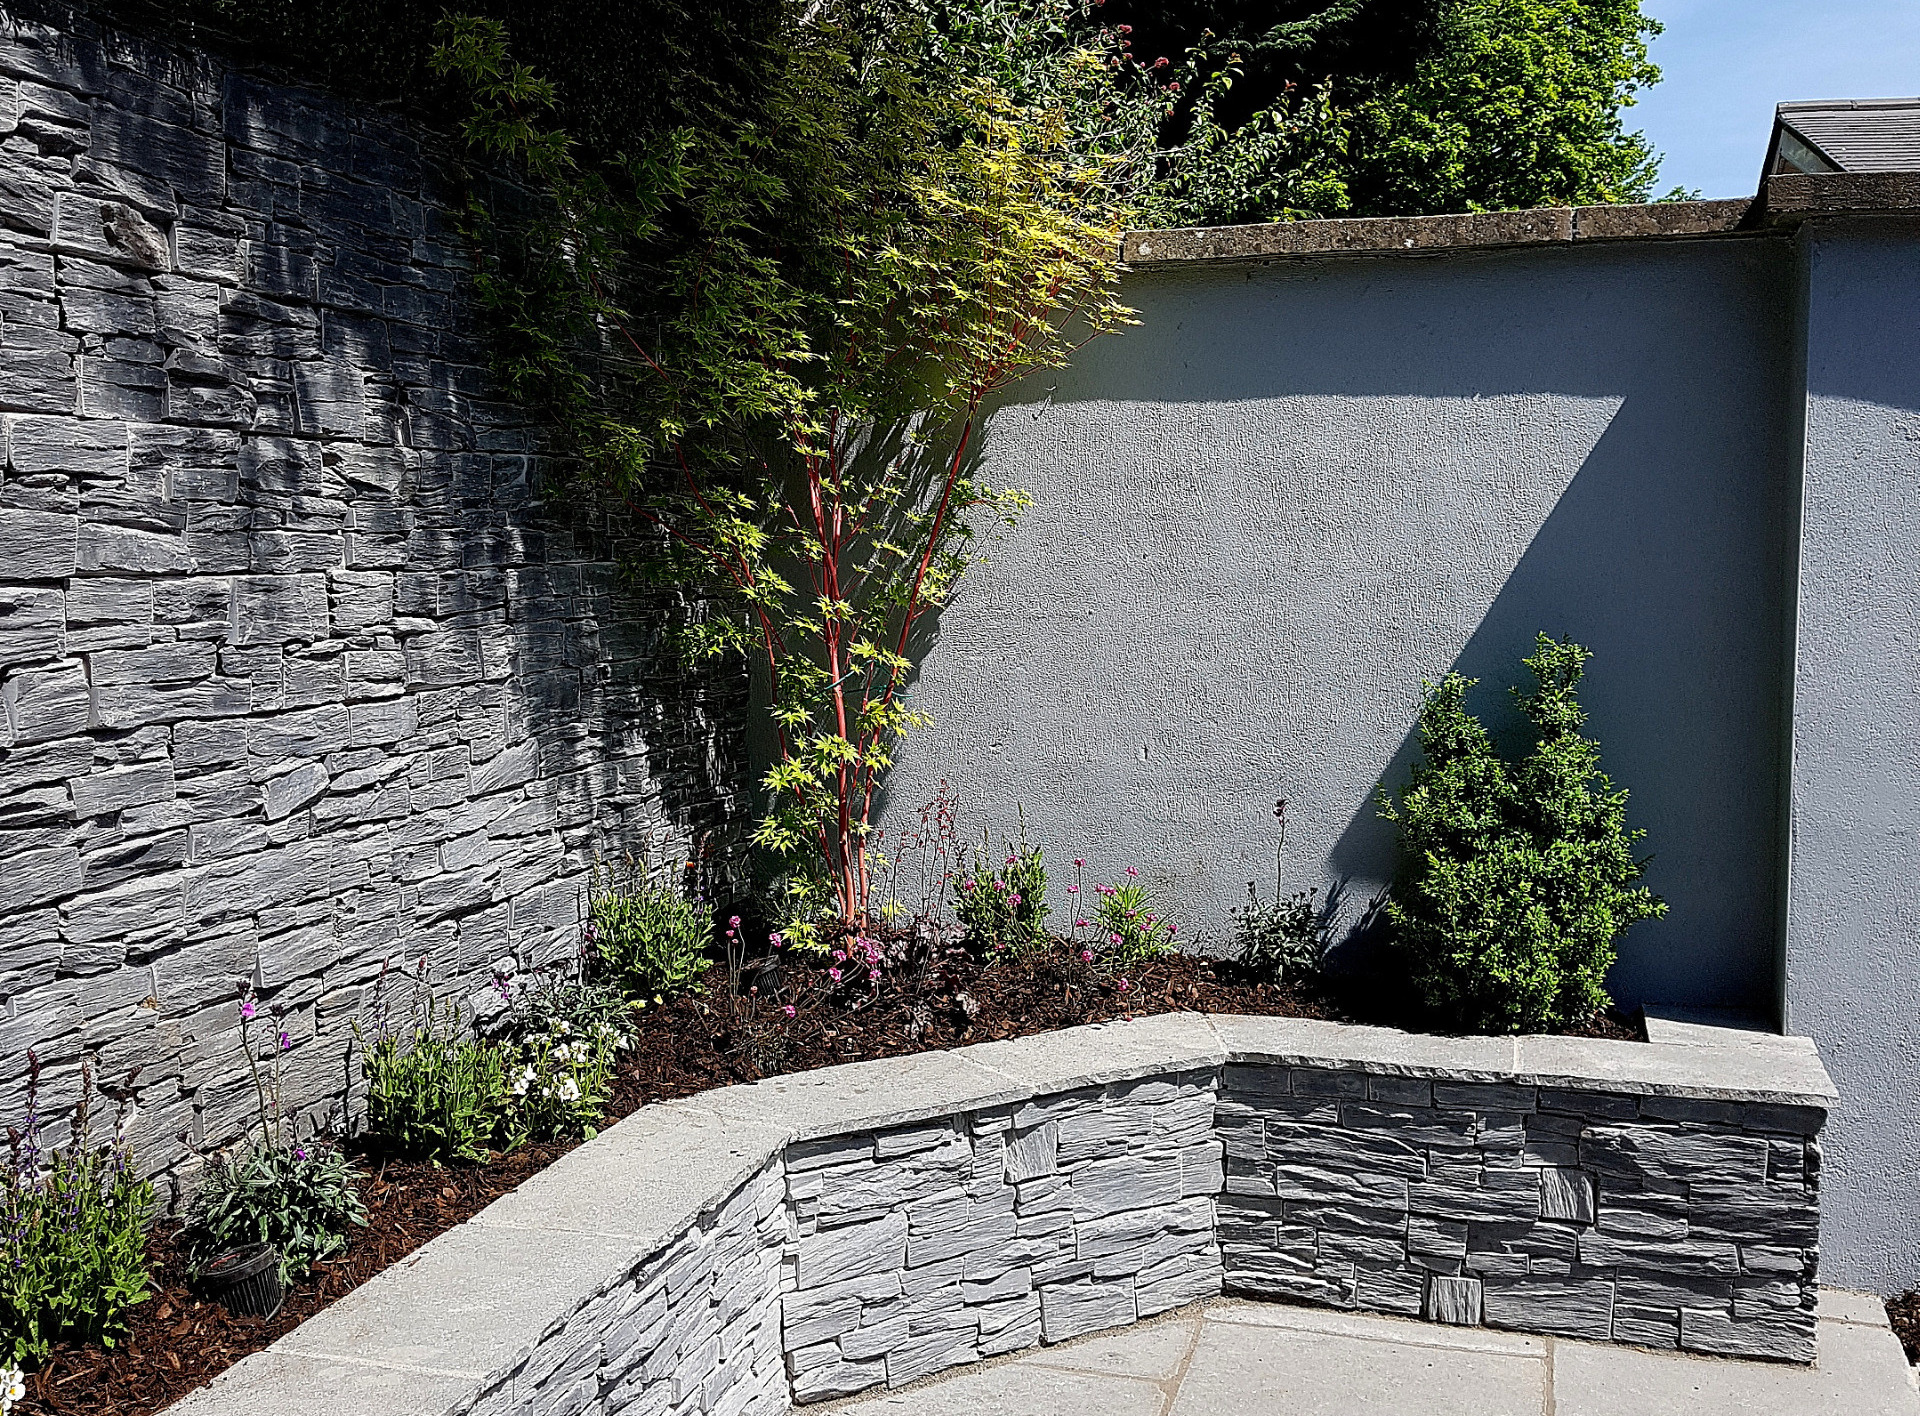 Natural Stone Cladding - a cost effective alternative for a natural stone wall finish